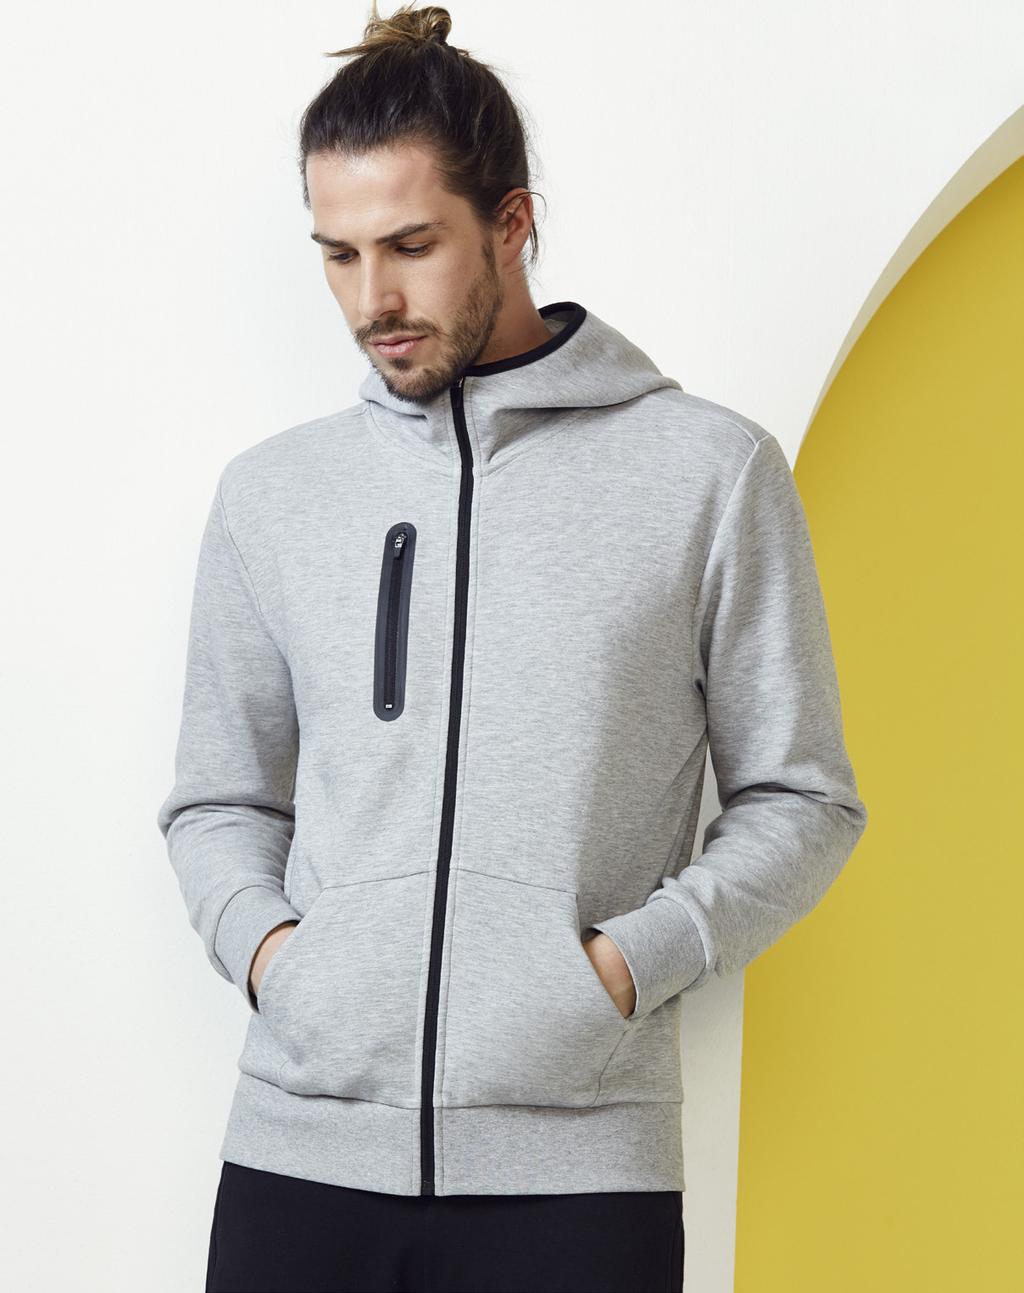 URBAN SPORT_ Clean and modern, these standout sweats will move